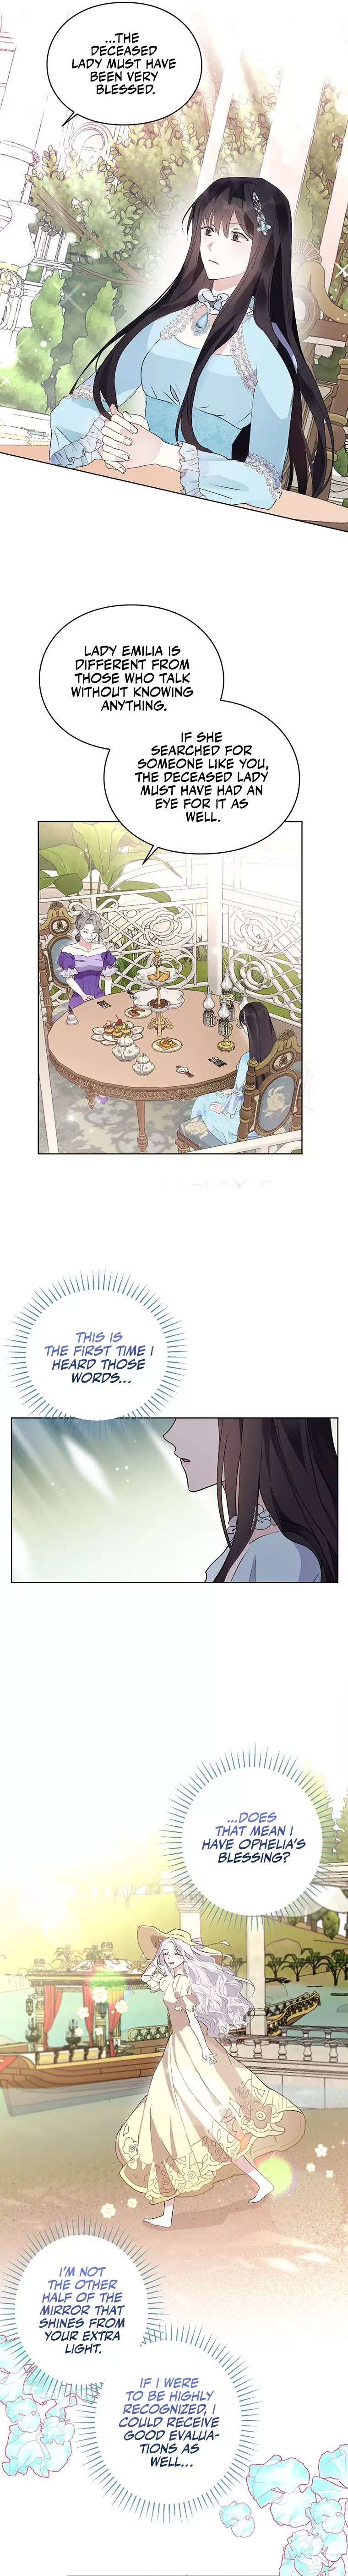 The Bad Ending Of The Otome Game - 19 page 11